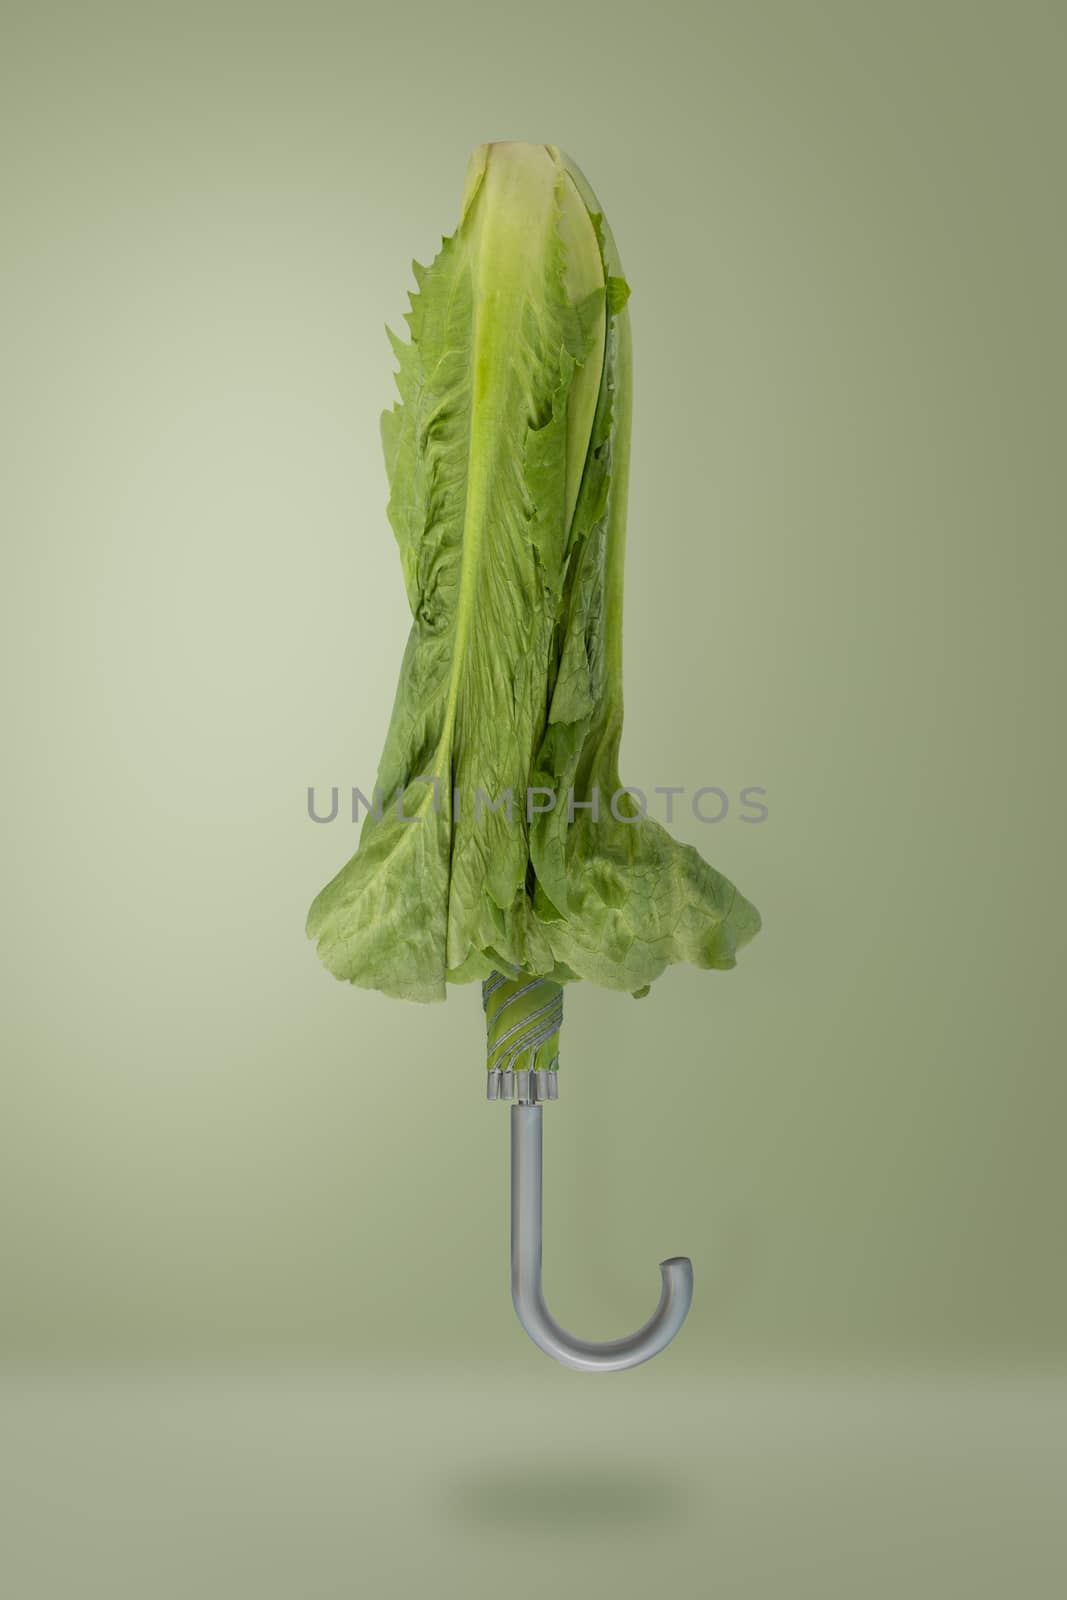 Contemporary art-Green umbrella from vegetable on green background with copy space, Minimal idea style.